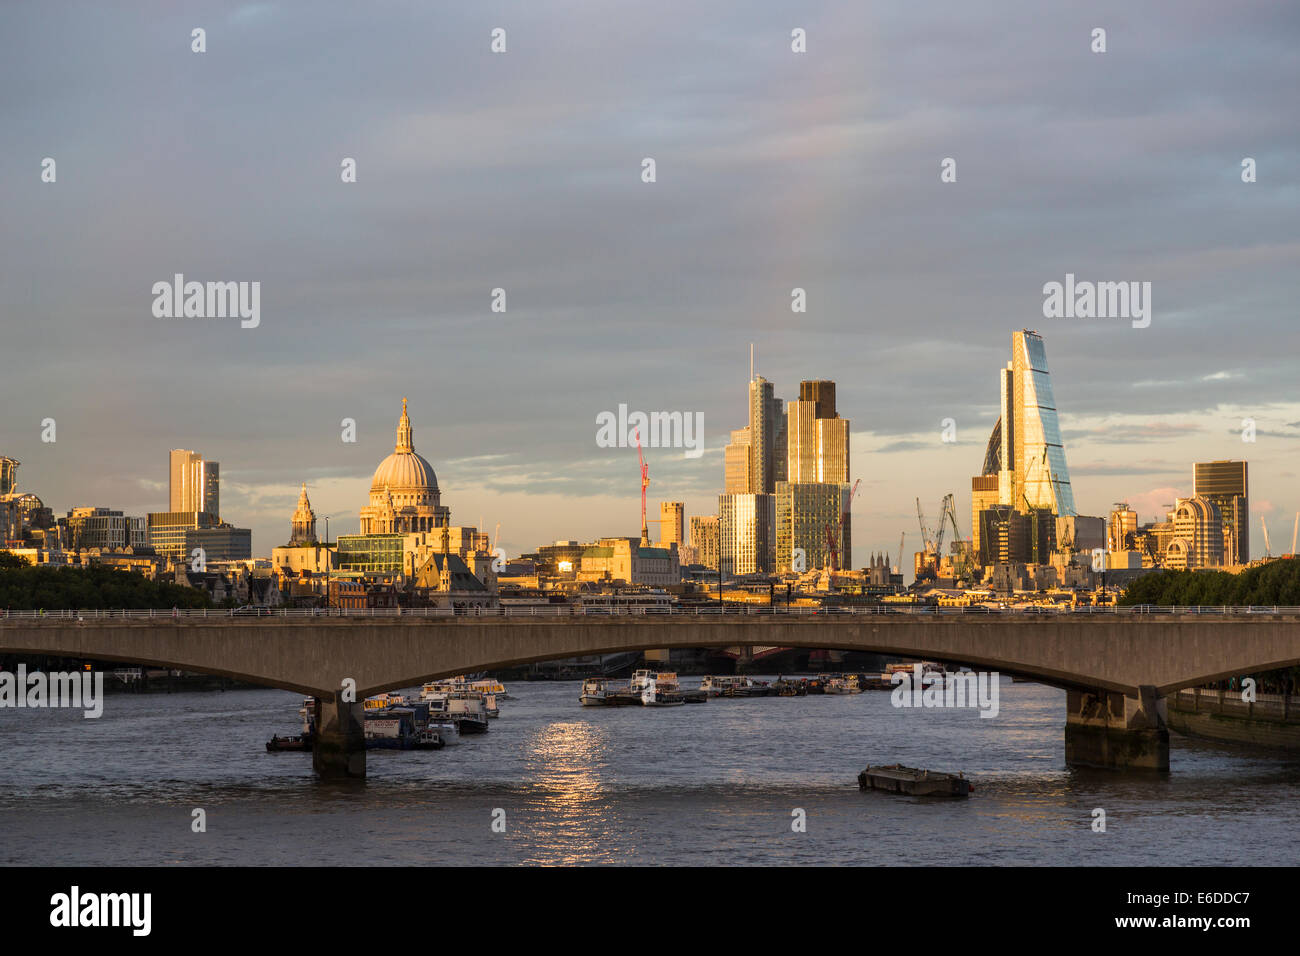 London evening skyline with rainbow: Waterloo Bridge, River Thames, St Paul's Cathedral, Cheesegrater, Tower 42, modern financial district landmarks Stock Photo